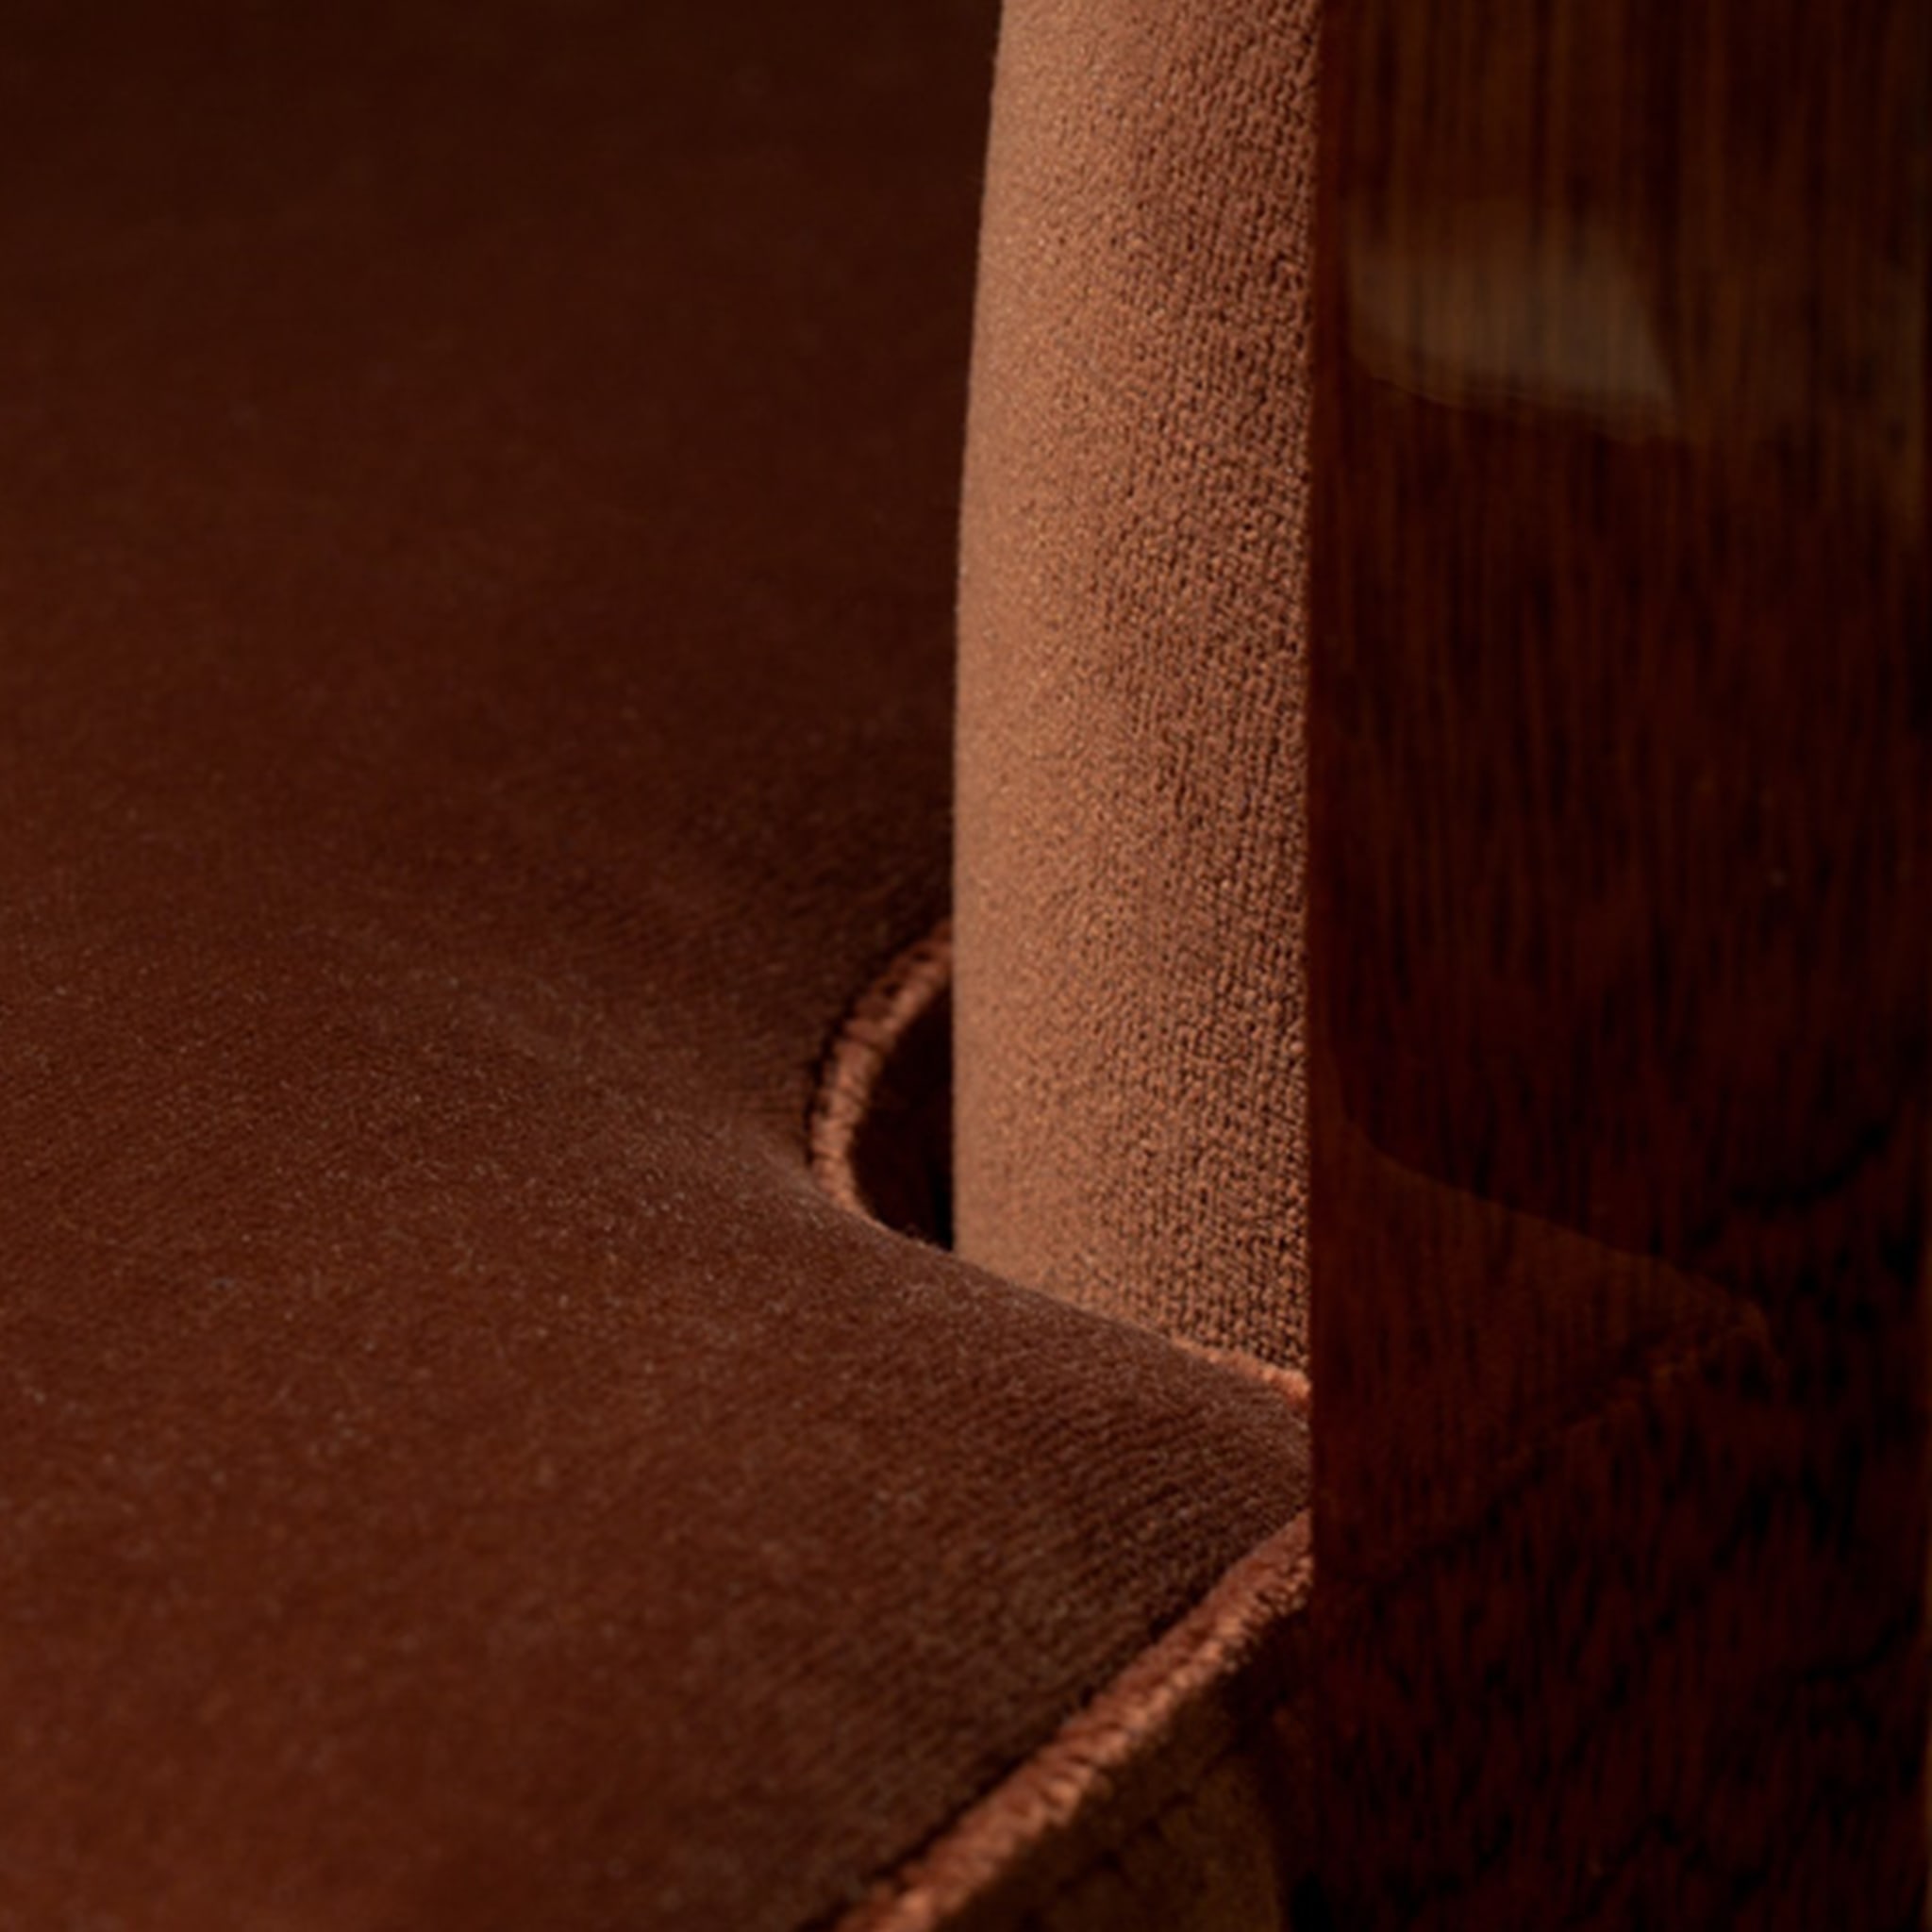 Curzon Armchair by Archer Humphryes Architects - Alternative view 4